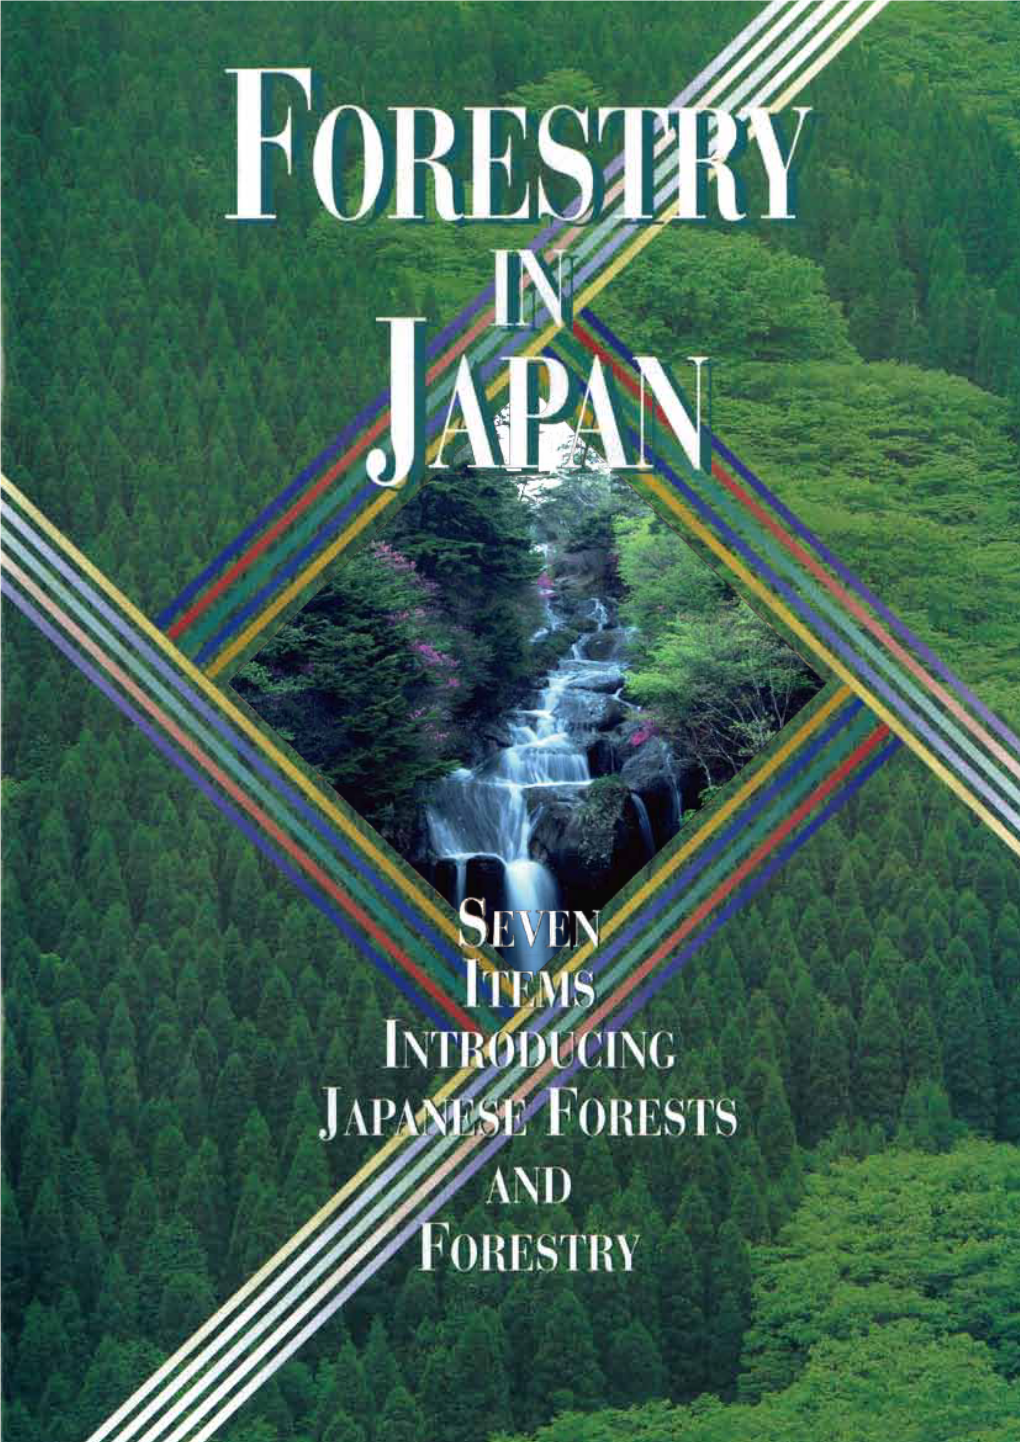 For More Than Forty Years, Japan Hes Been Cooperating with Partner Countries for Sustainable Forest Management